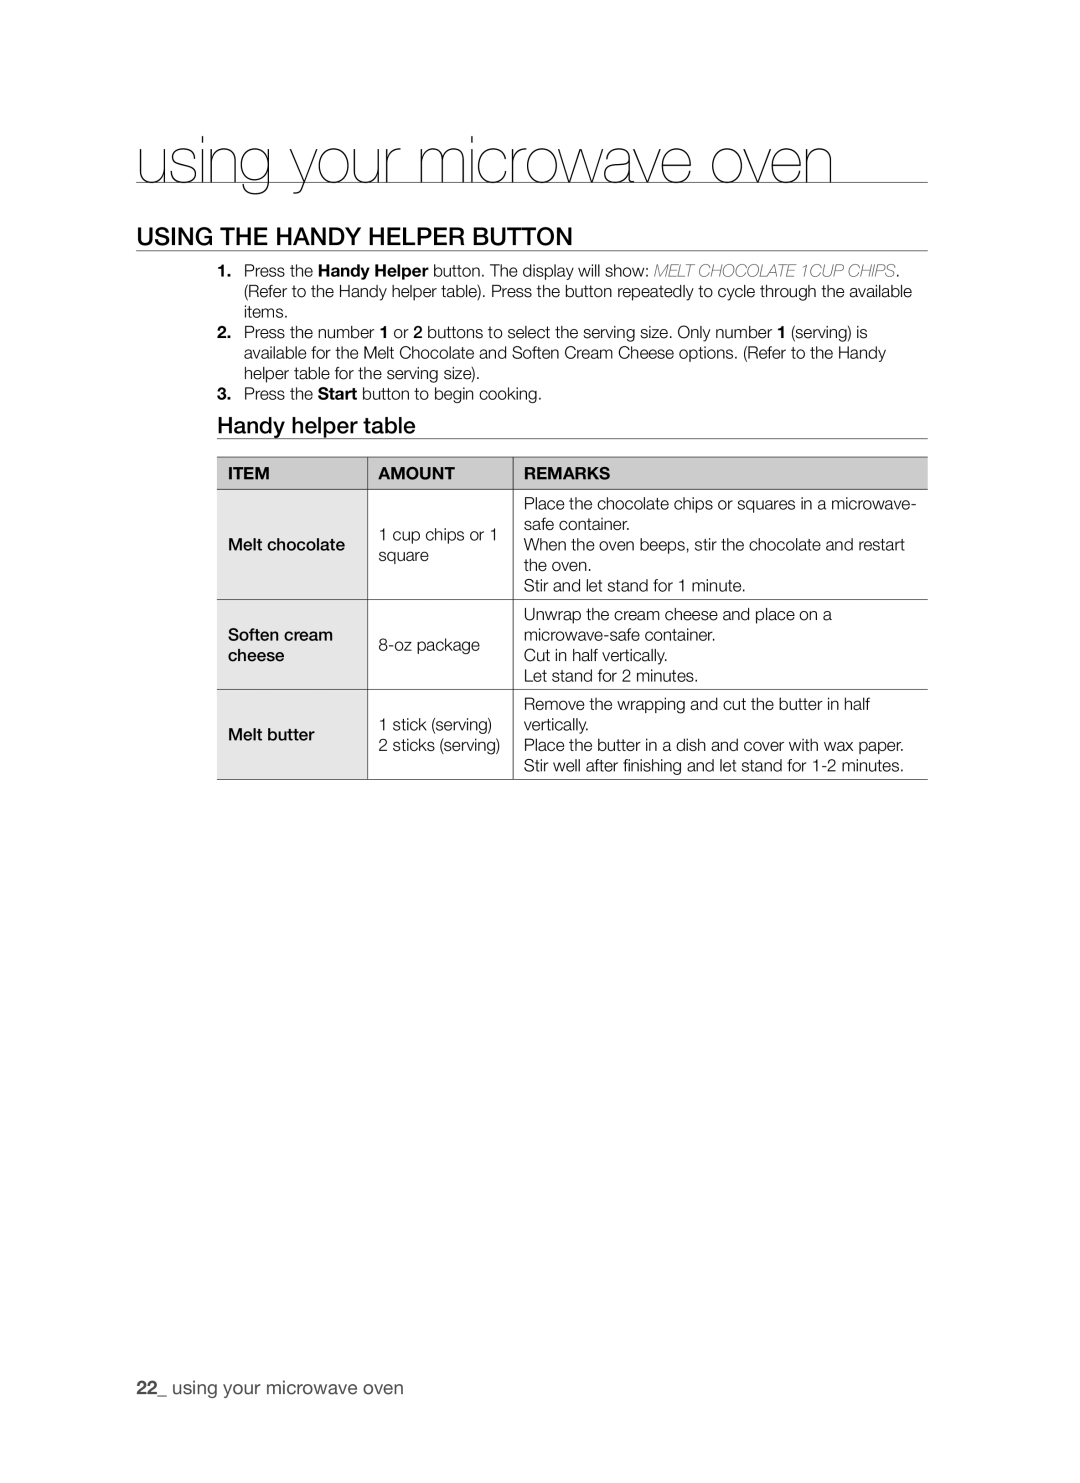 Samsung SMH7185 user manual Using the Handy Helper button, using your microwave oven, Handy helper table 